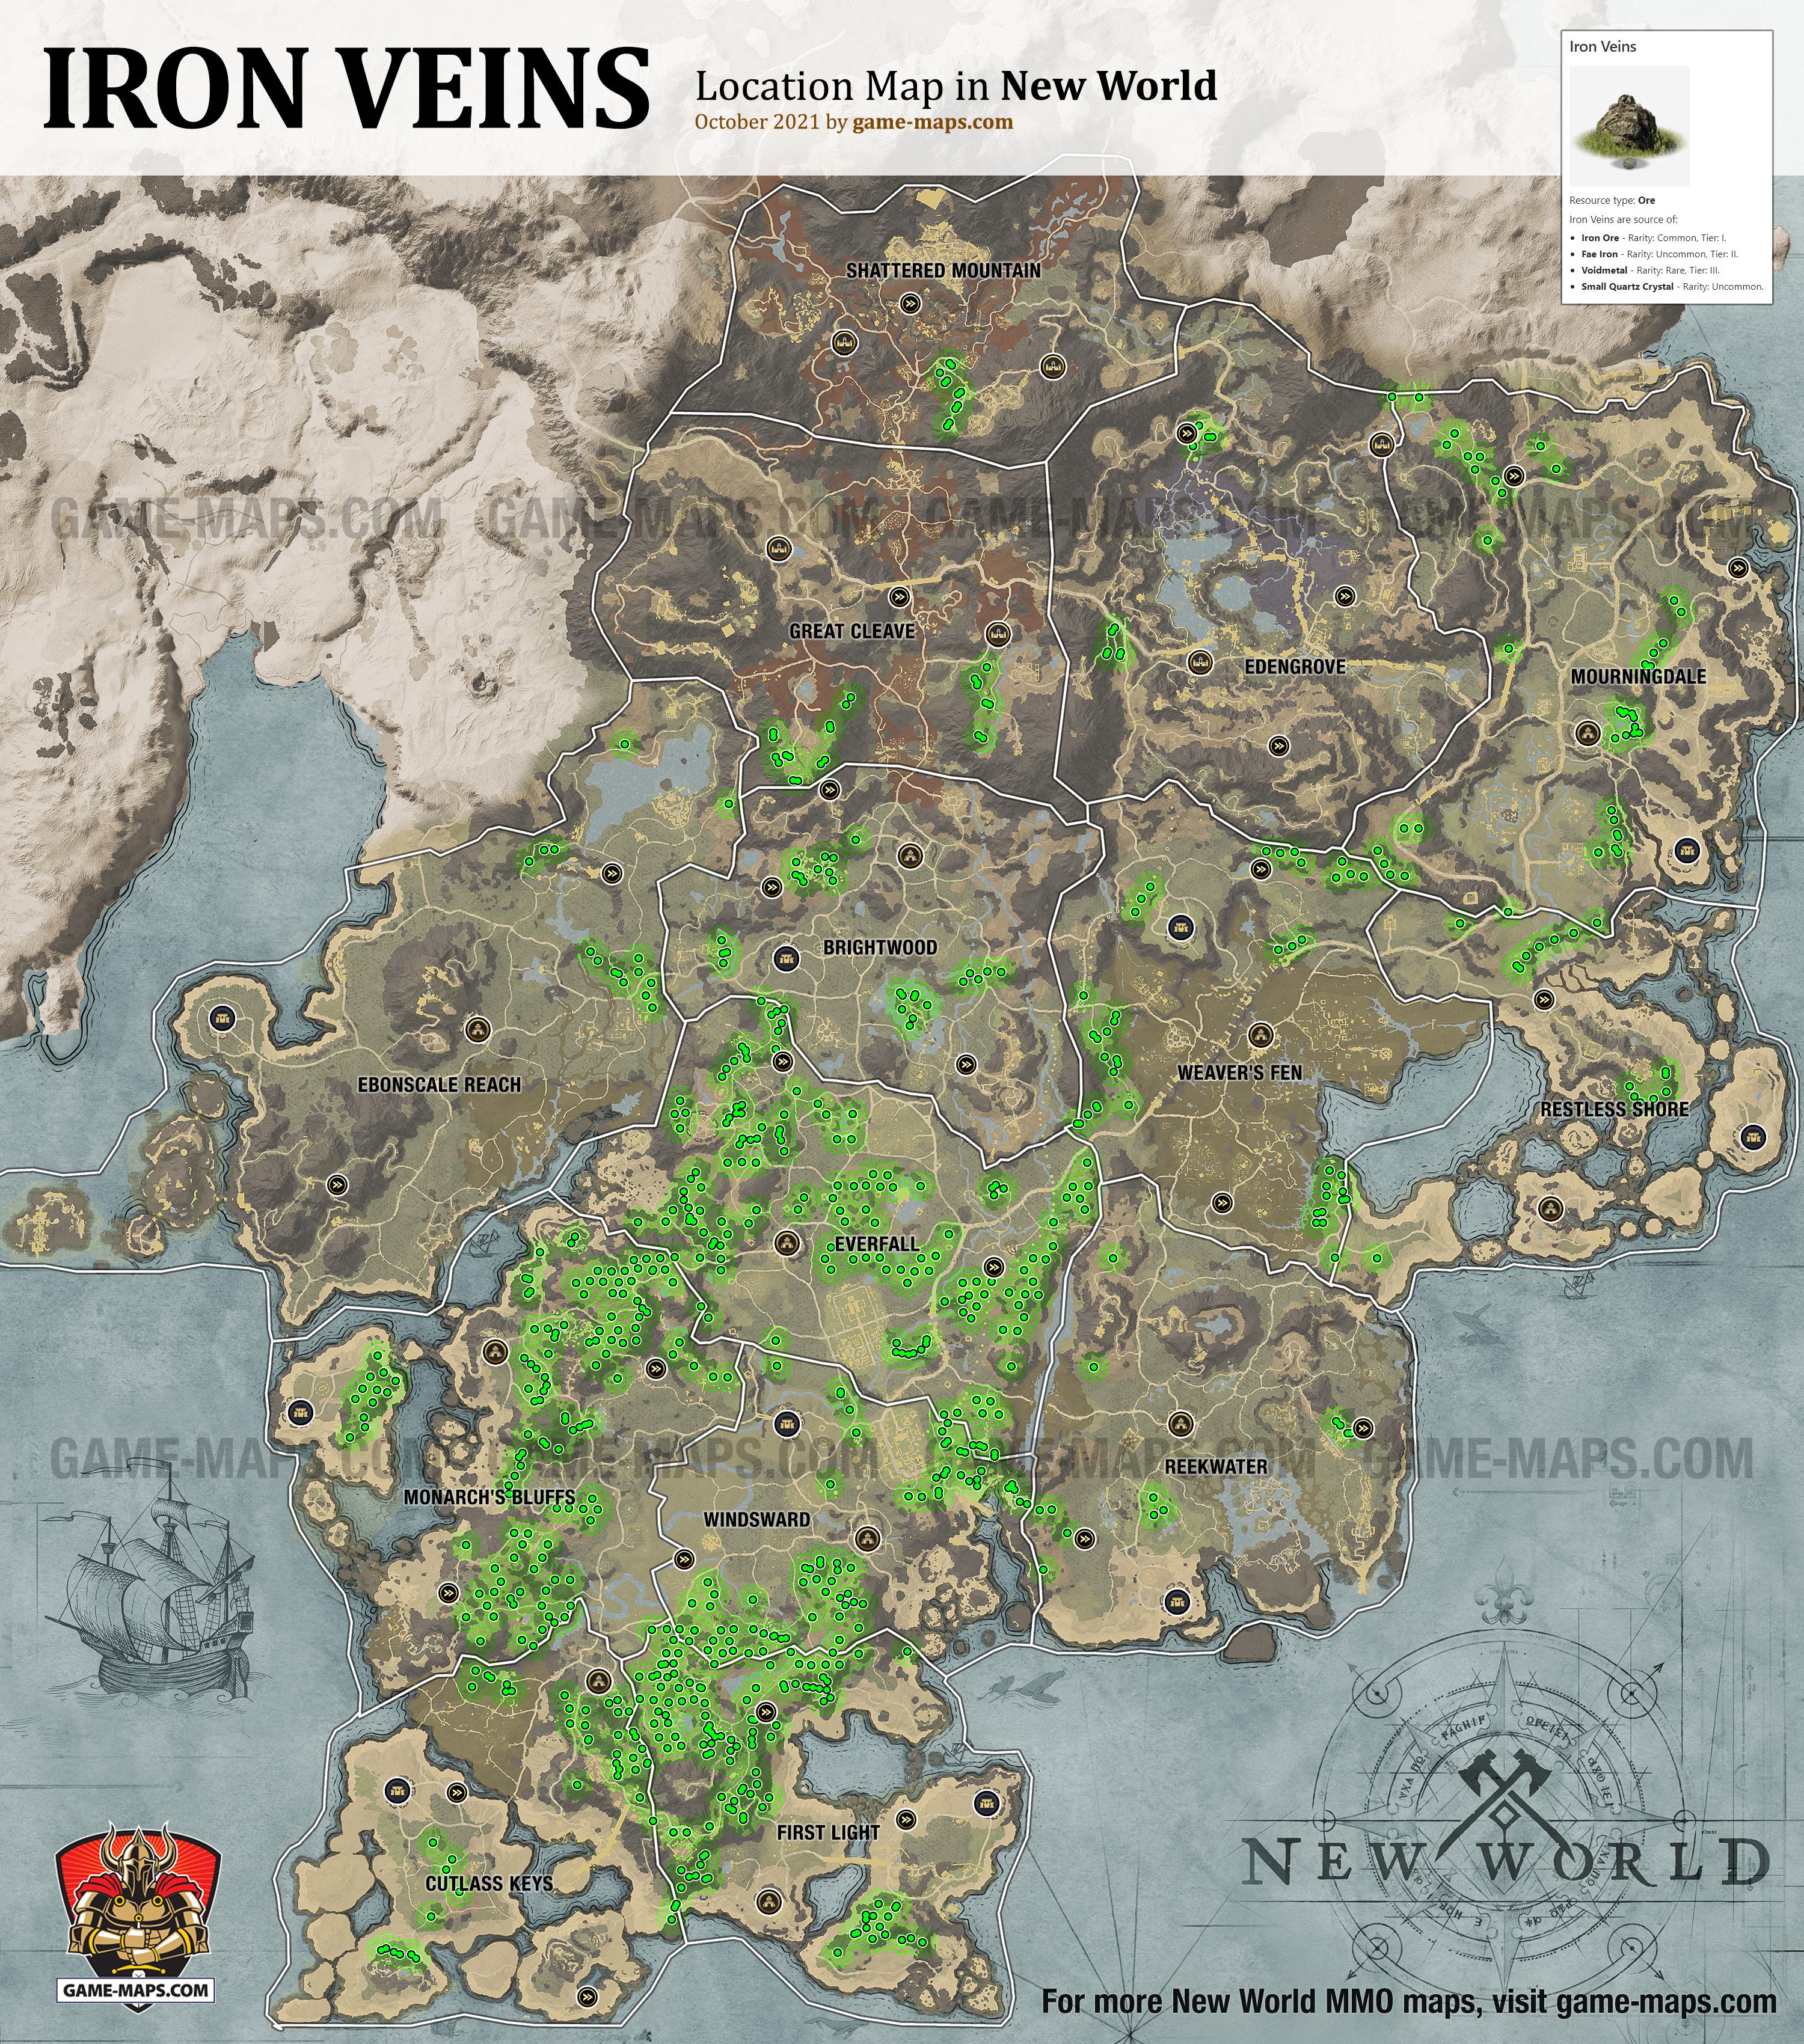 New World Resource Location Map of Iron Veins, source of Ore Crafting Resources: Iron Ore, Fae Iron, Voidmetal, Small Quartz Crystal.